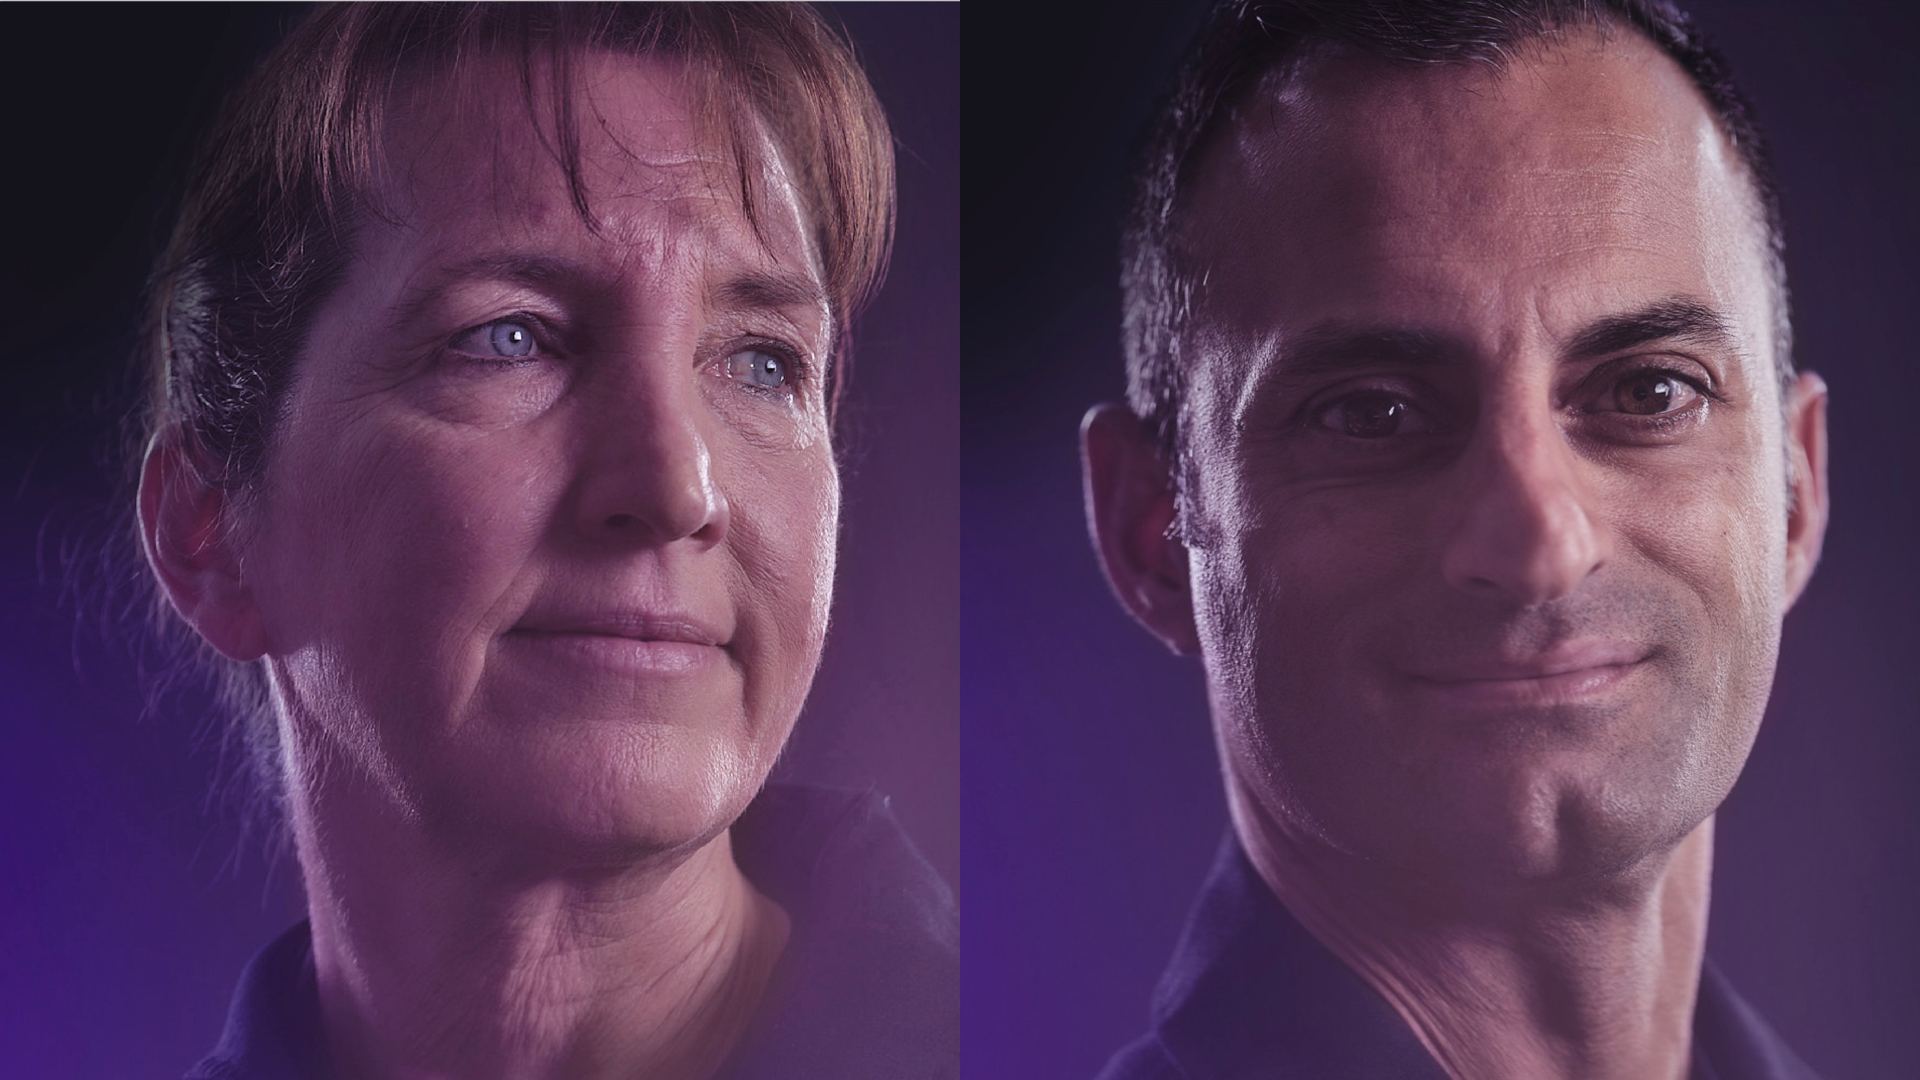 Left to right, side by side, close-ups of VMS Eve pilots Kelly Latimer and Jameel Janjua.